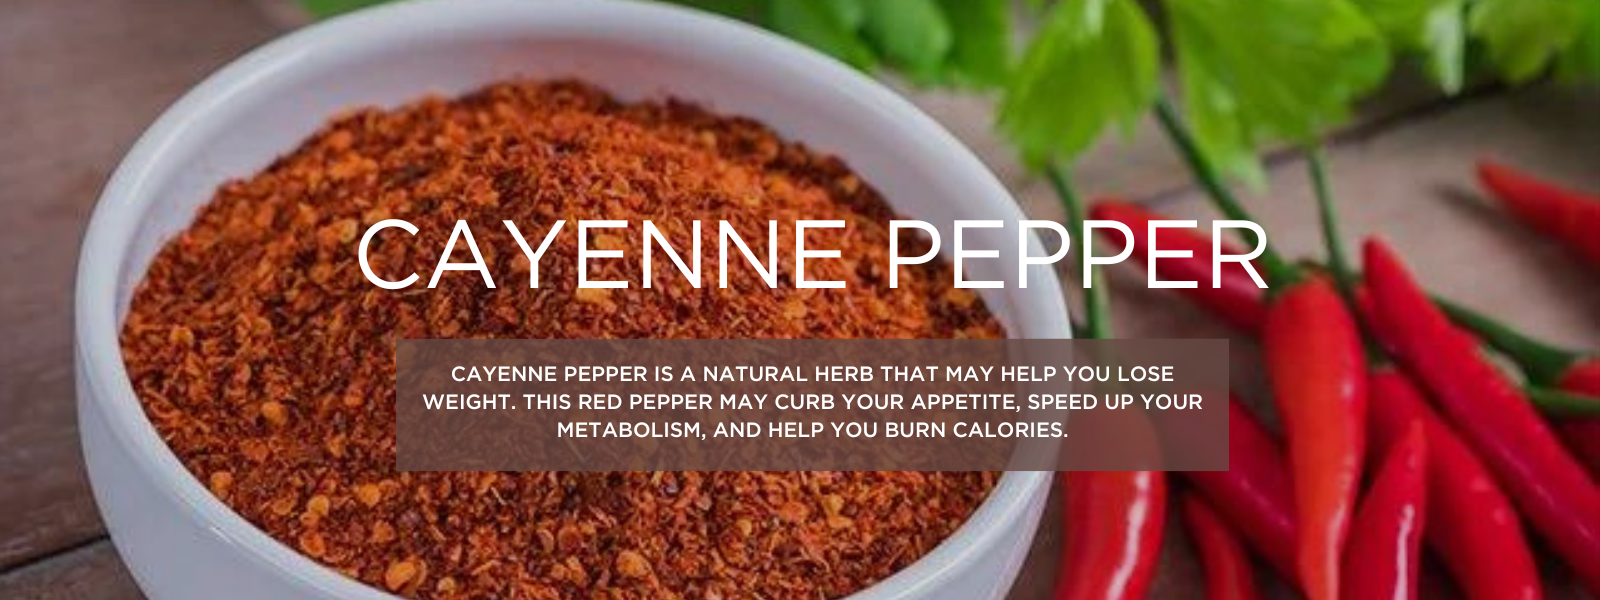 Cayenne Pepper - Health Benefits, Uses and Important Facts